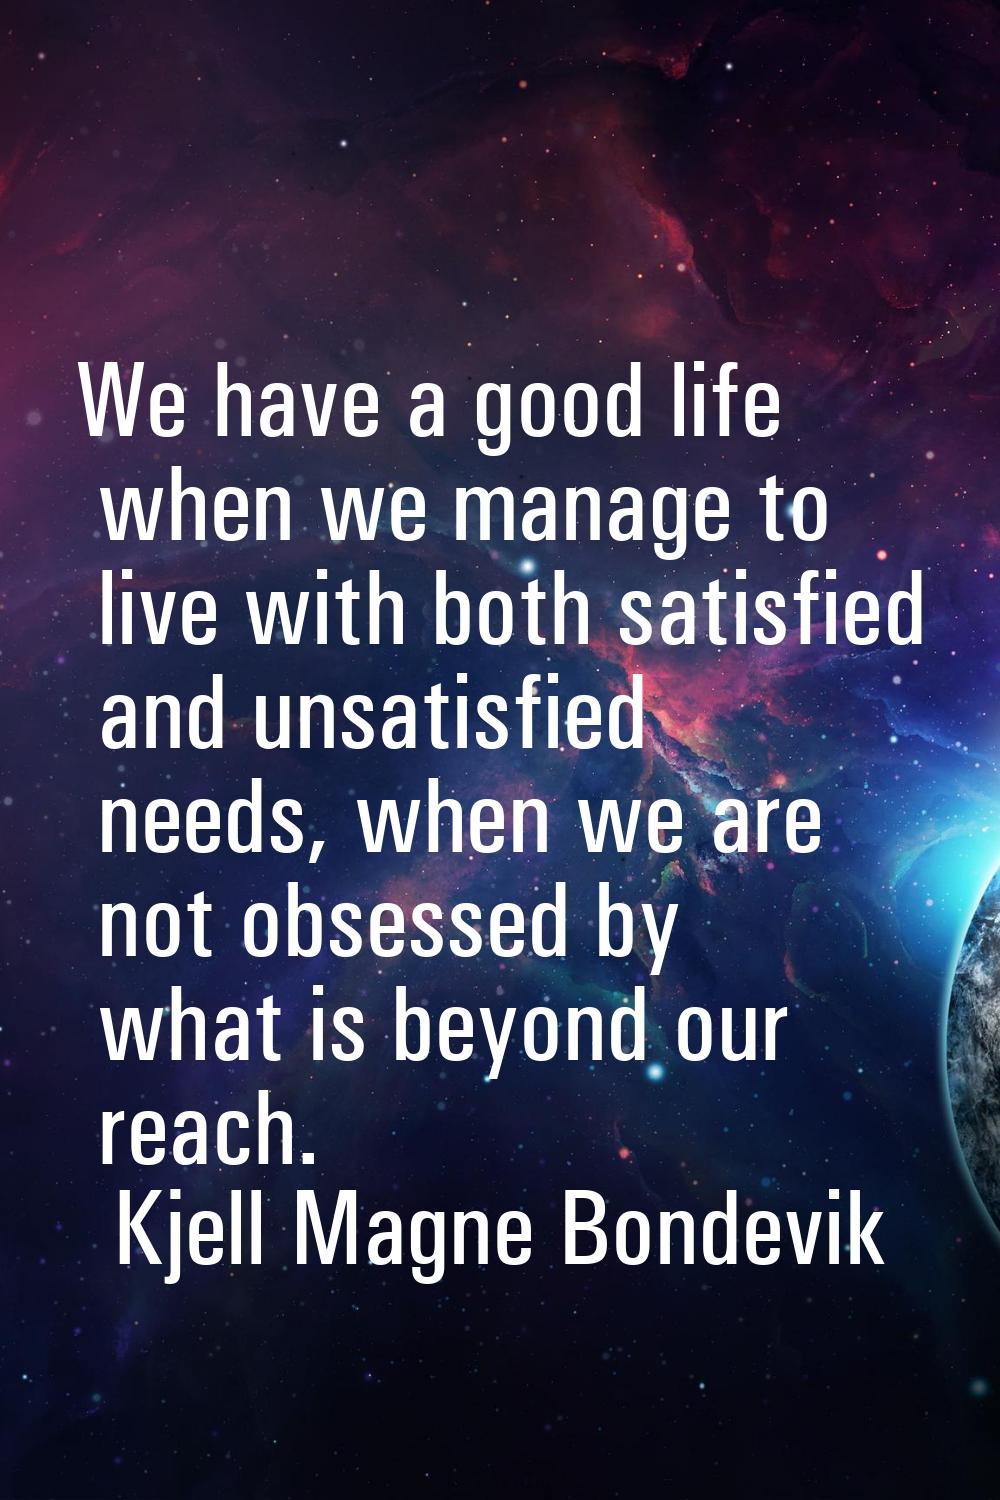 We have a good life when we manage to live with both satisfied and unsatisfied needs, when we are n